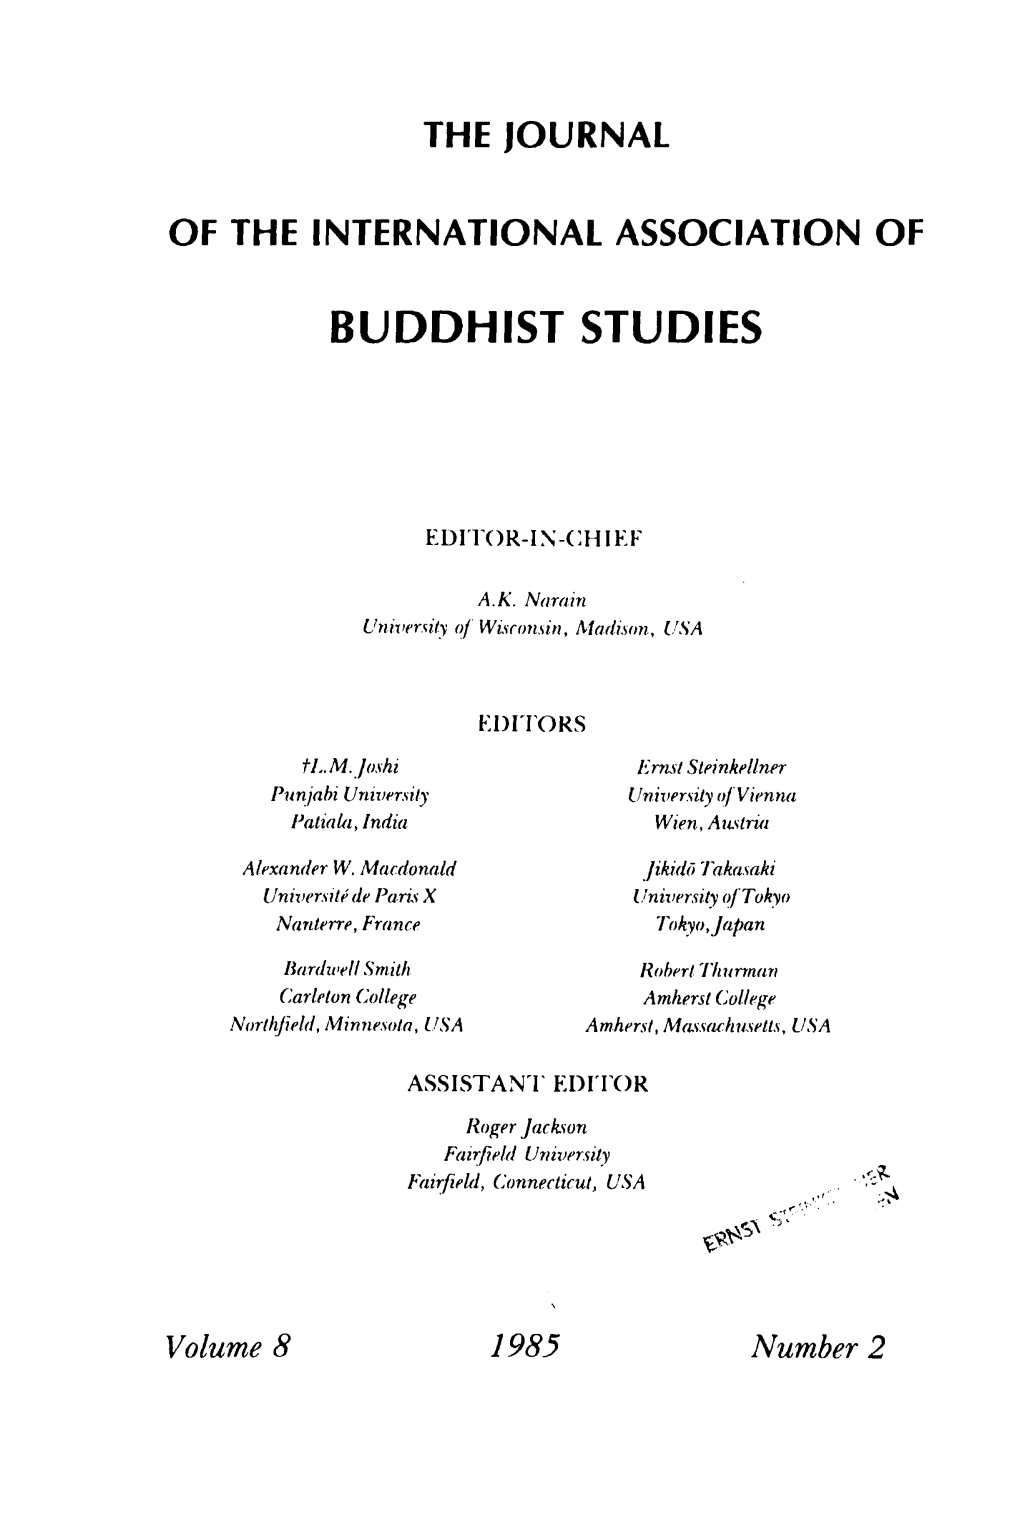 Scientific and Humanistic Aspects of Rdzogs-Chen Thought, by Herbert V